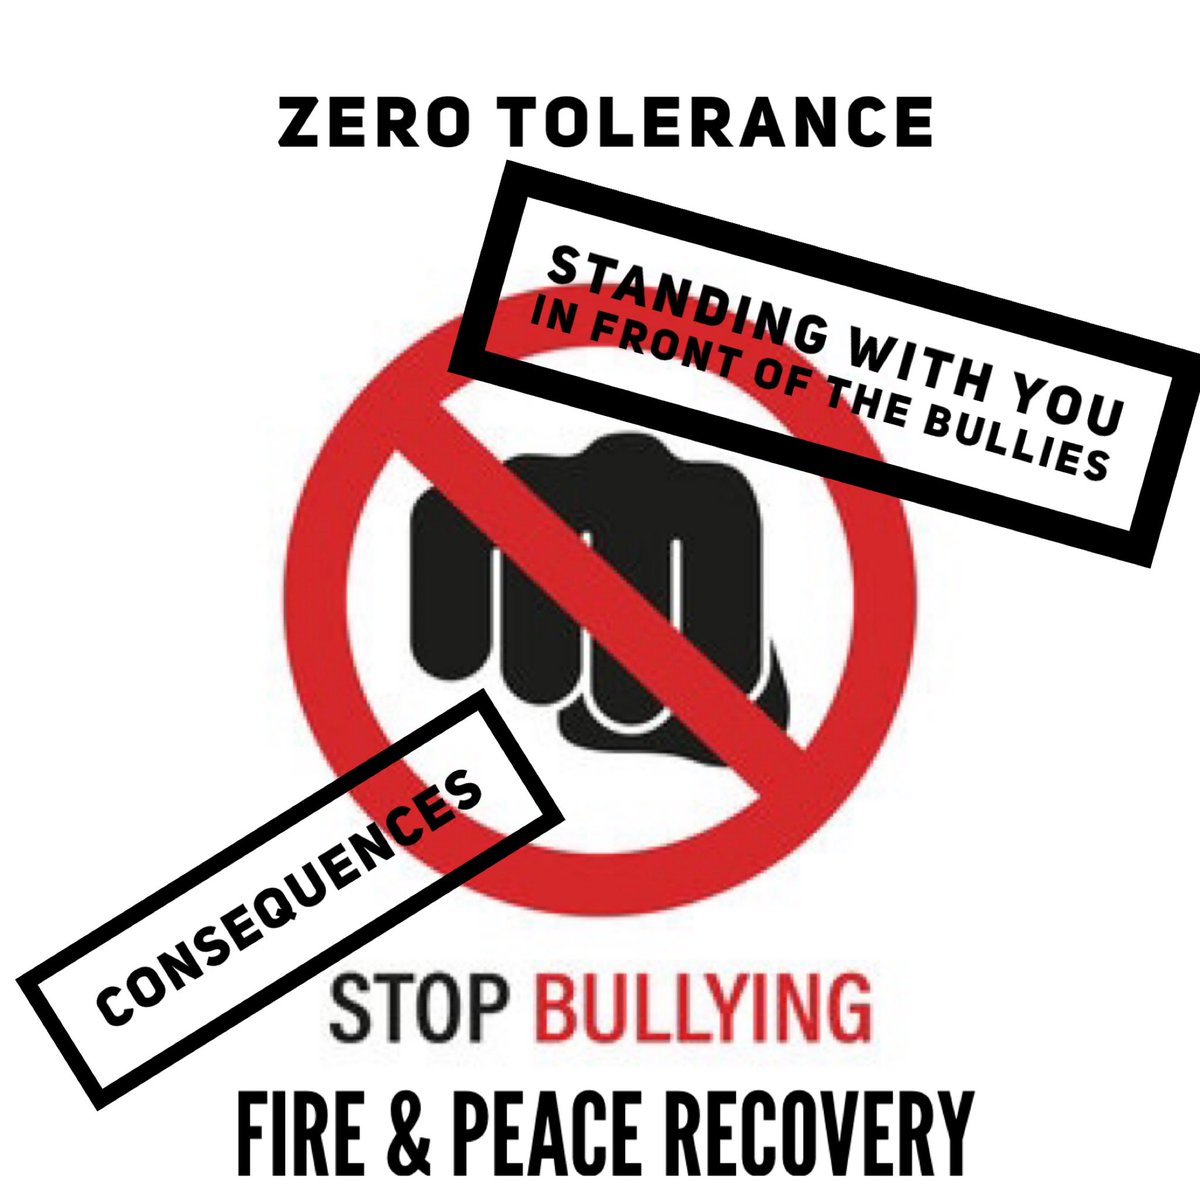 Something that absolutely has to be addressed. We stand with you in front of the bullies. Has to STOP 🛑 ♥️🔥☮️🙏

#stopthebullies #connection #womenempowerment #restorationfife #livingthecircle #3sidestoeverystory #labelsareforjars #lookafteryourself #aces #thereareoptions